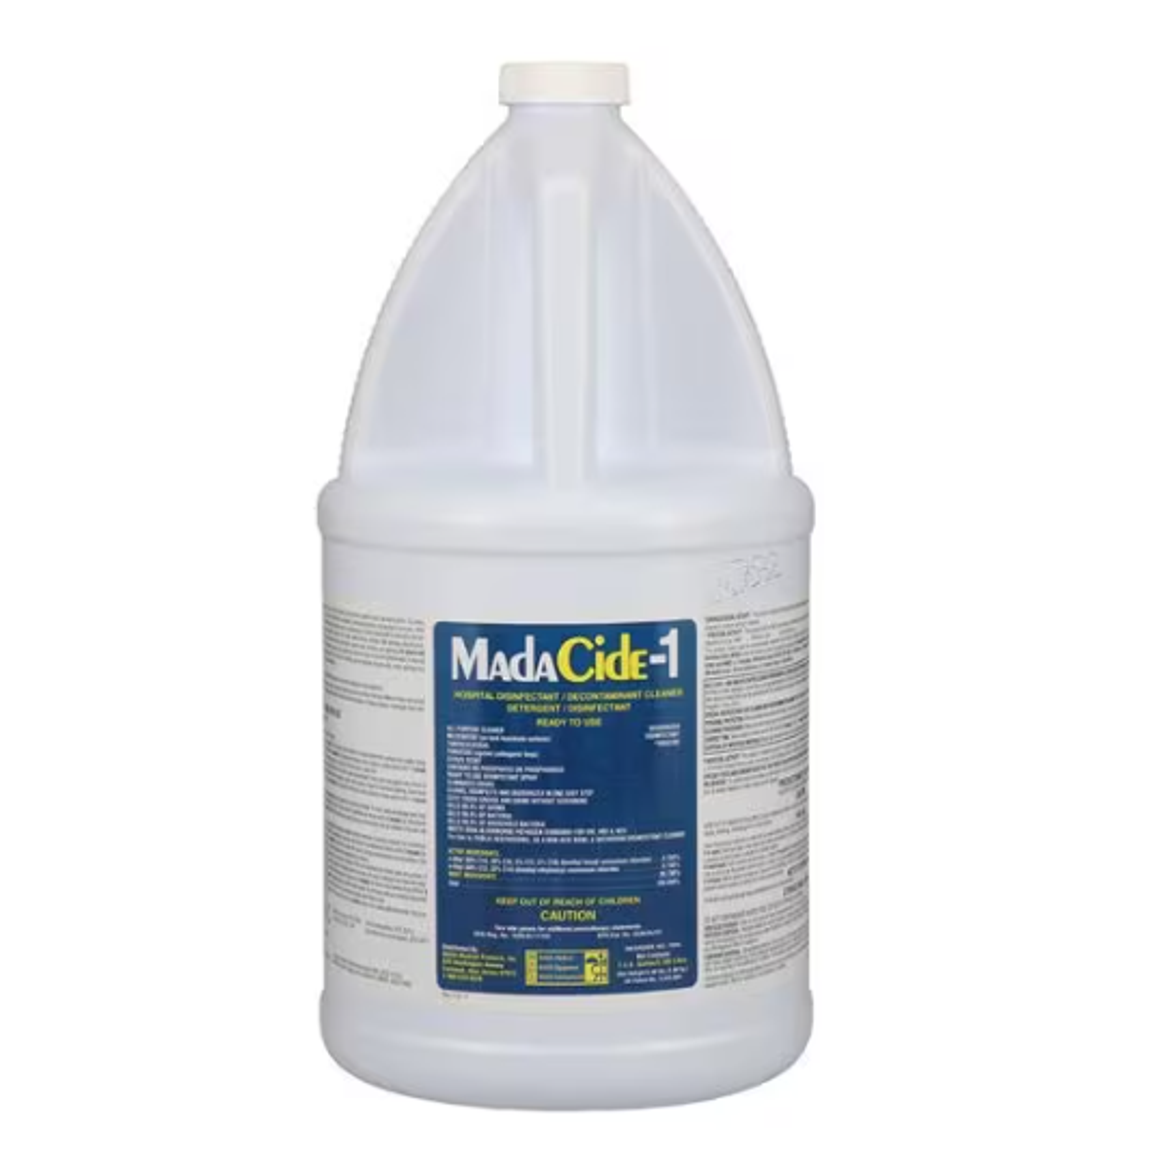 Madacide-1 Disinfectant Solution Refill 1 gal 4/Case